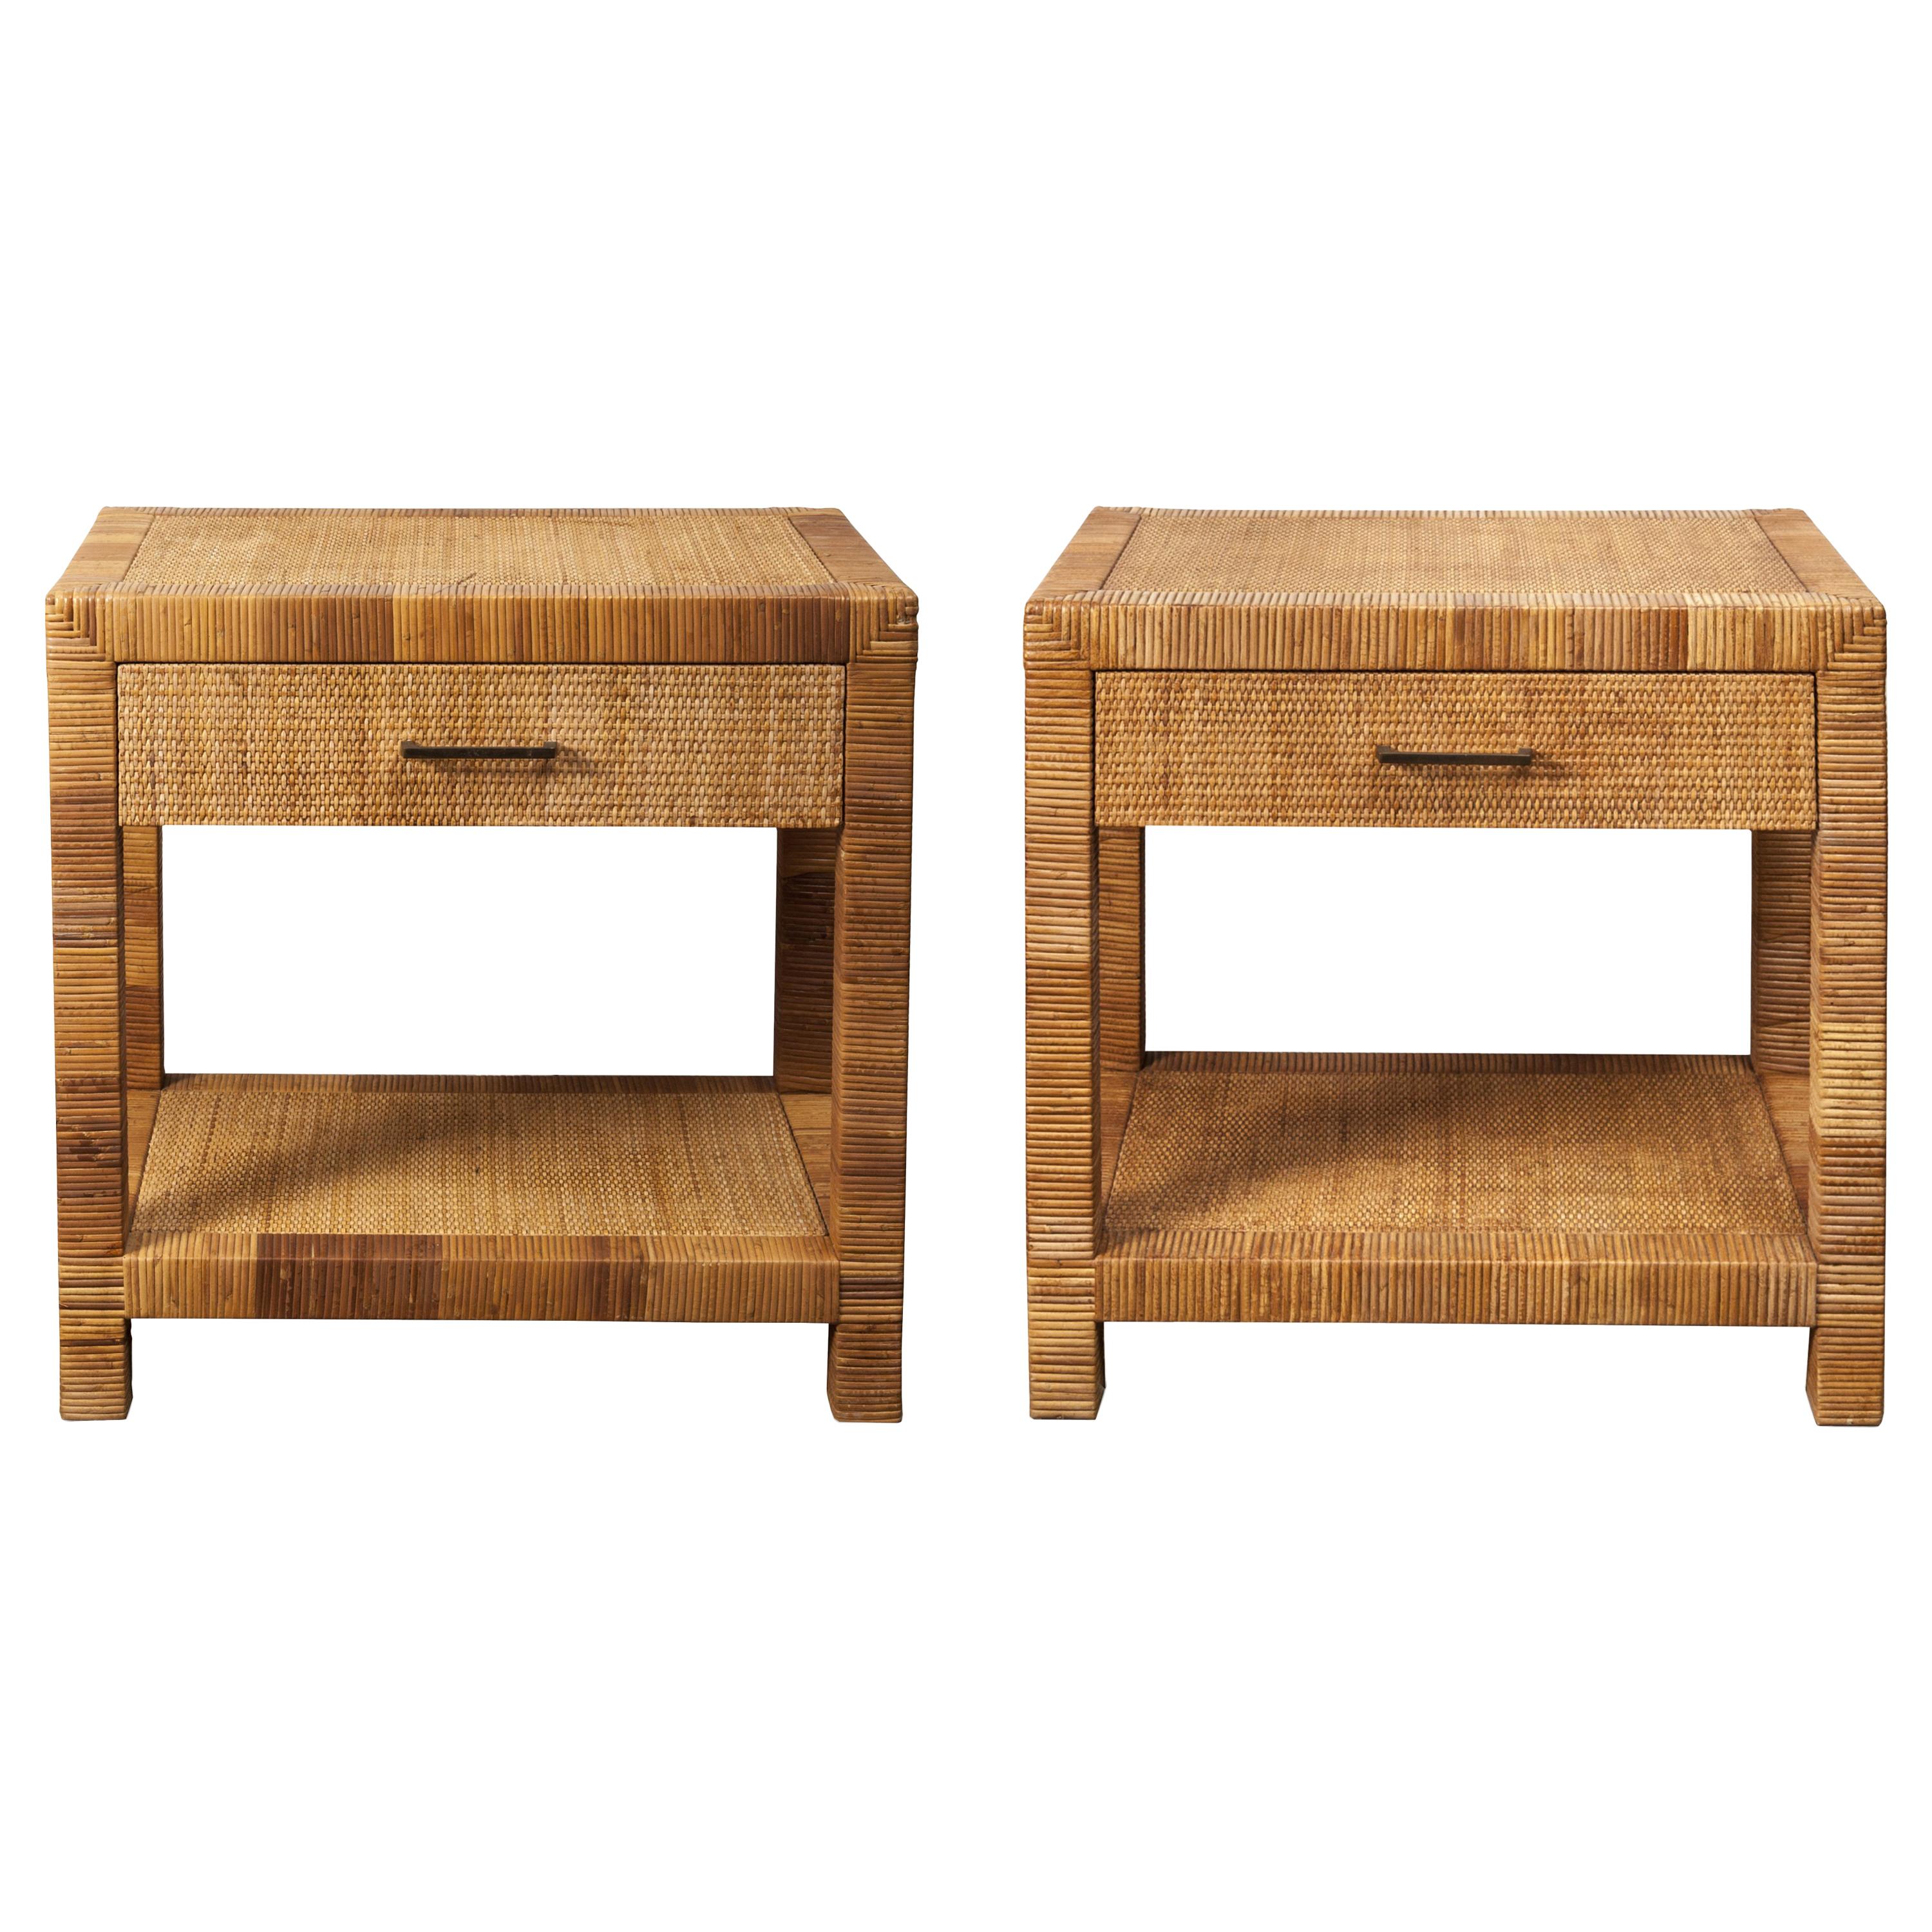 Pair of Rattan and Wicker Nightstand Tables